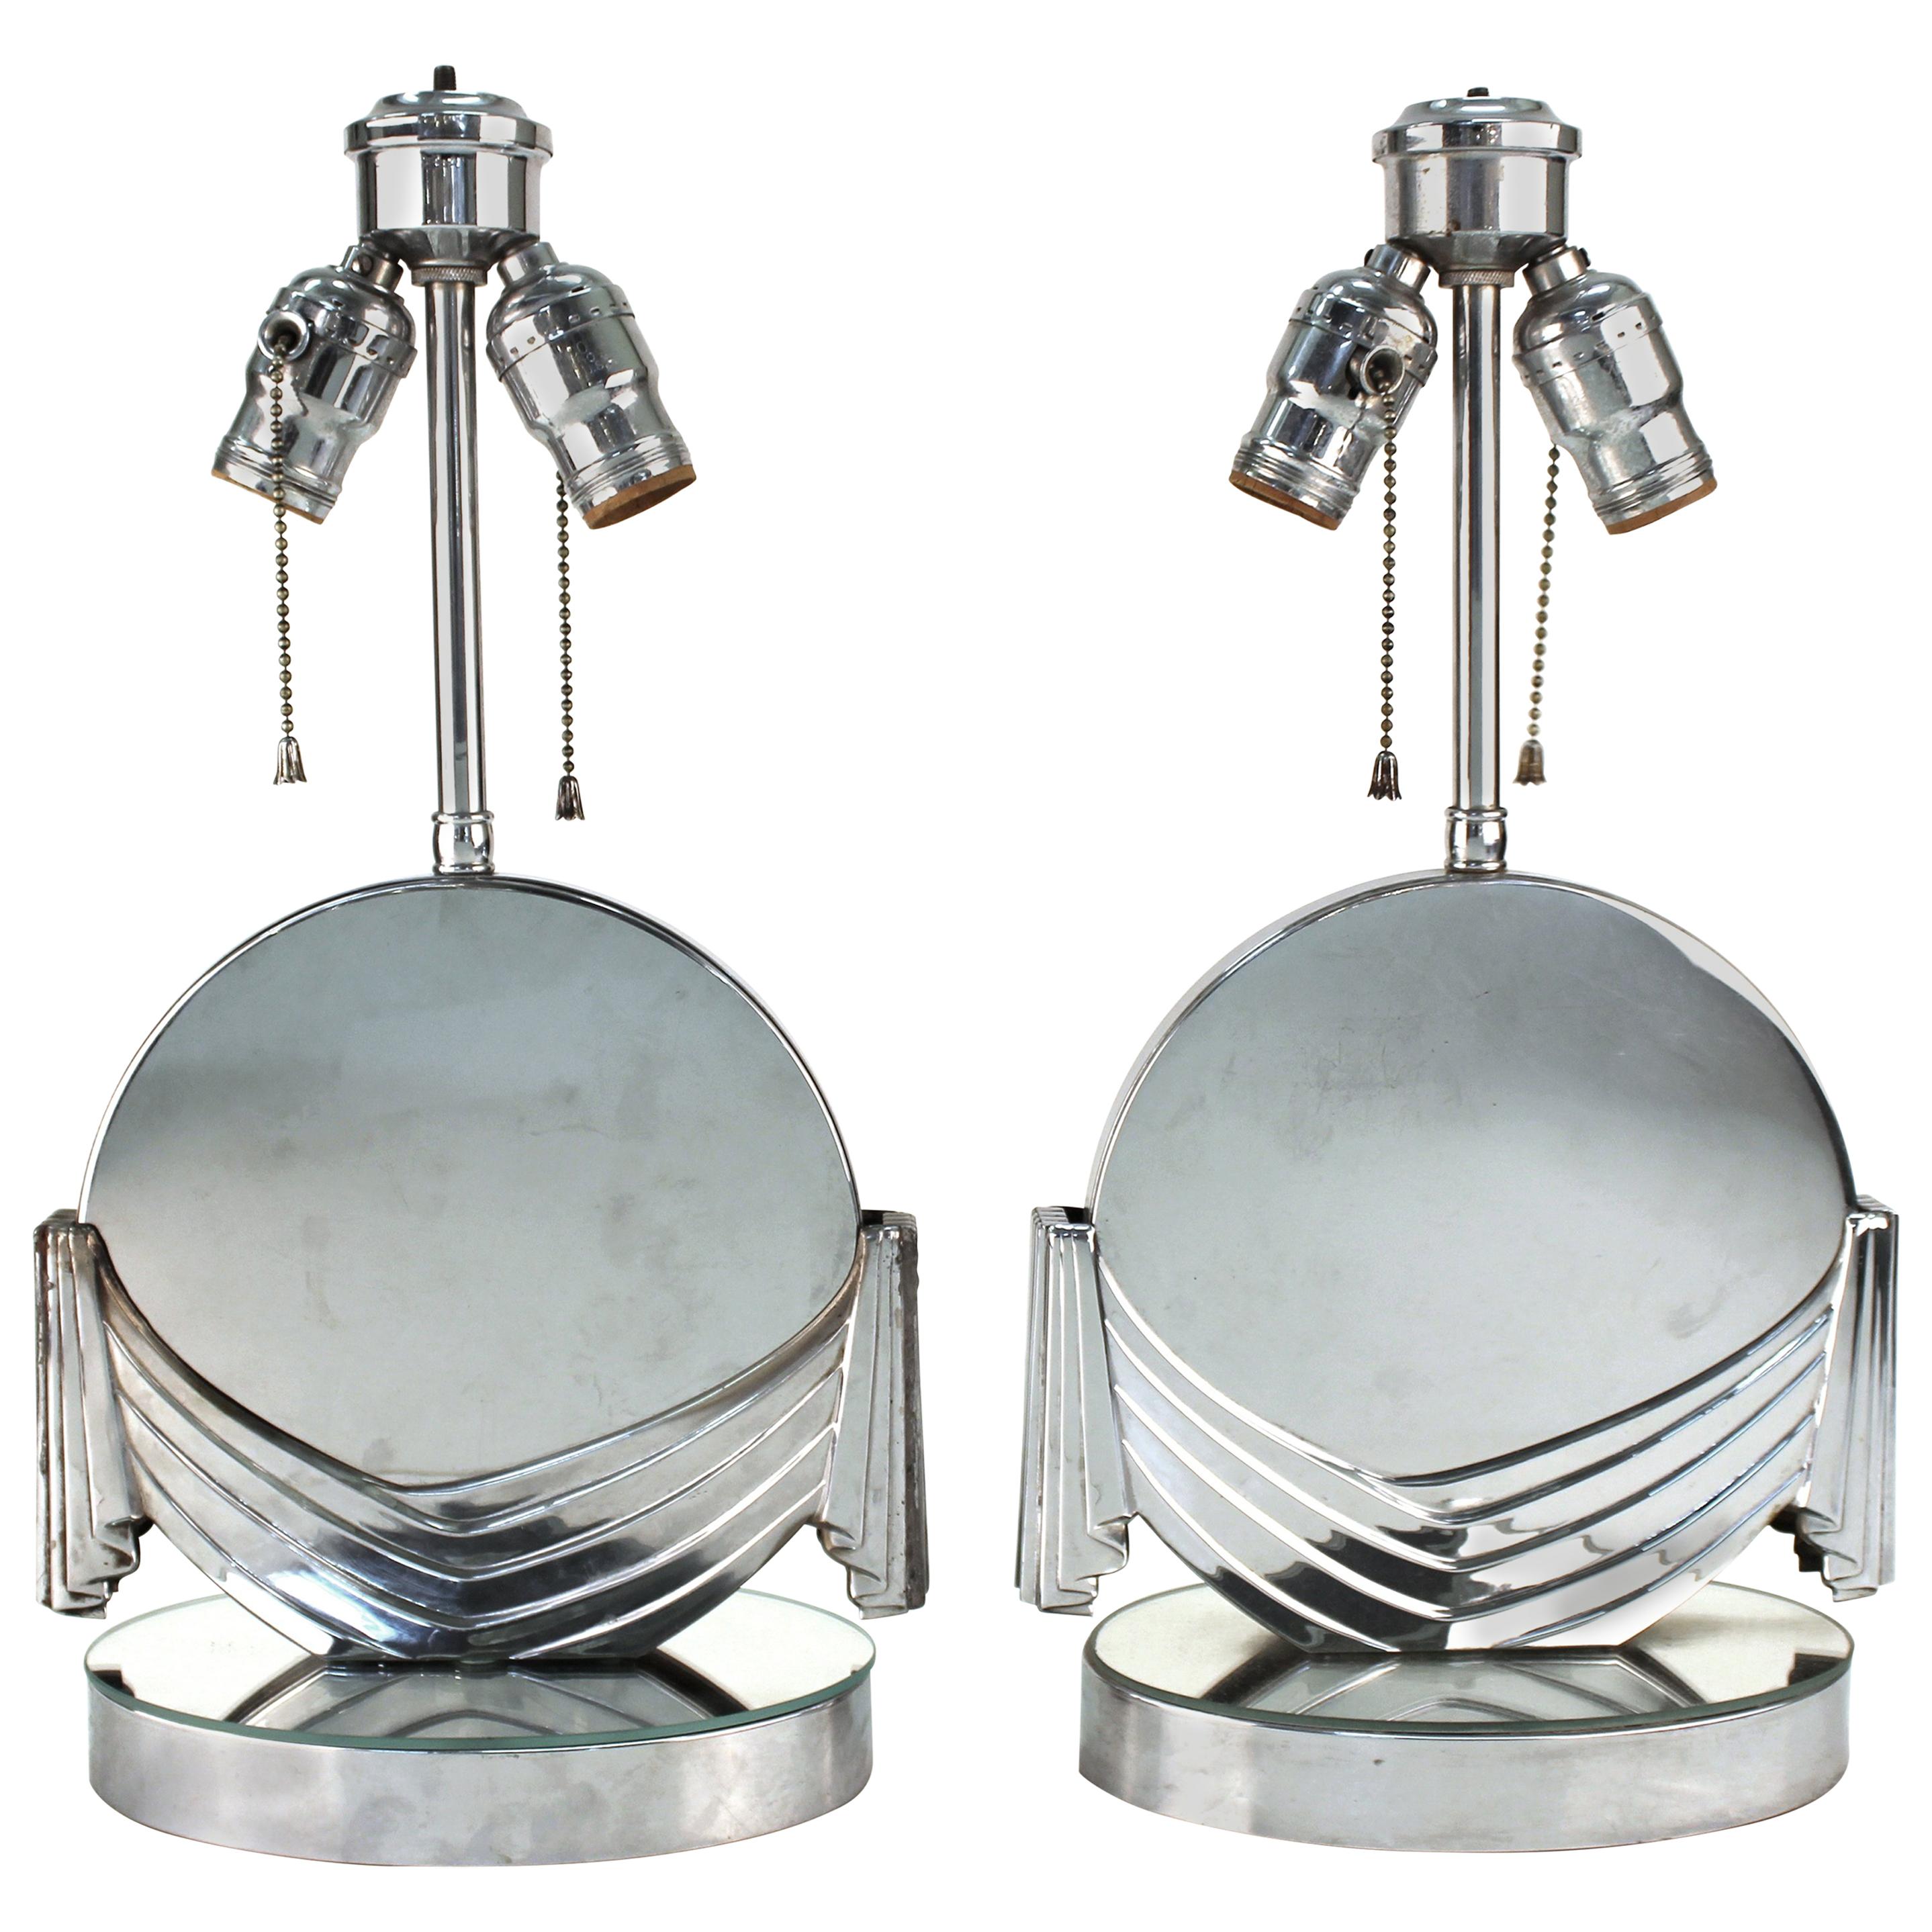 Art Deco Table Lamps with Mirrored Surfaces